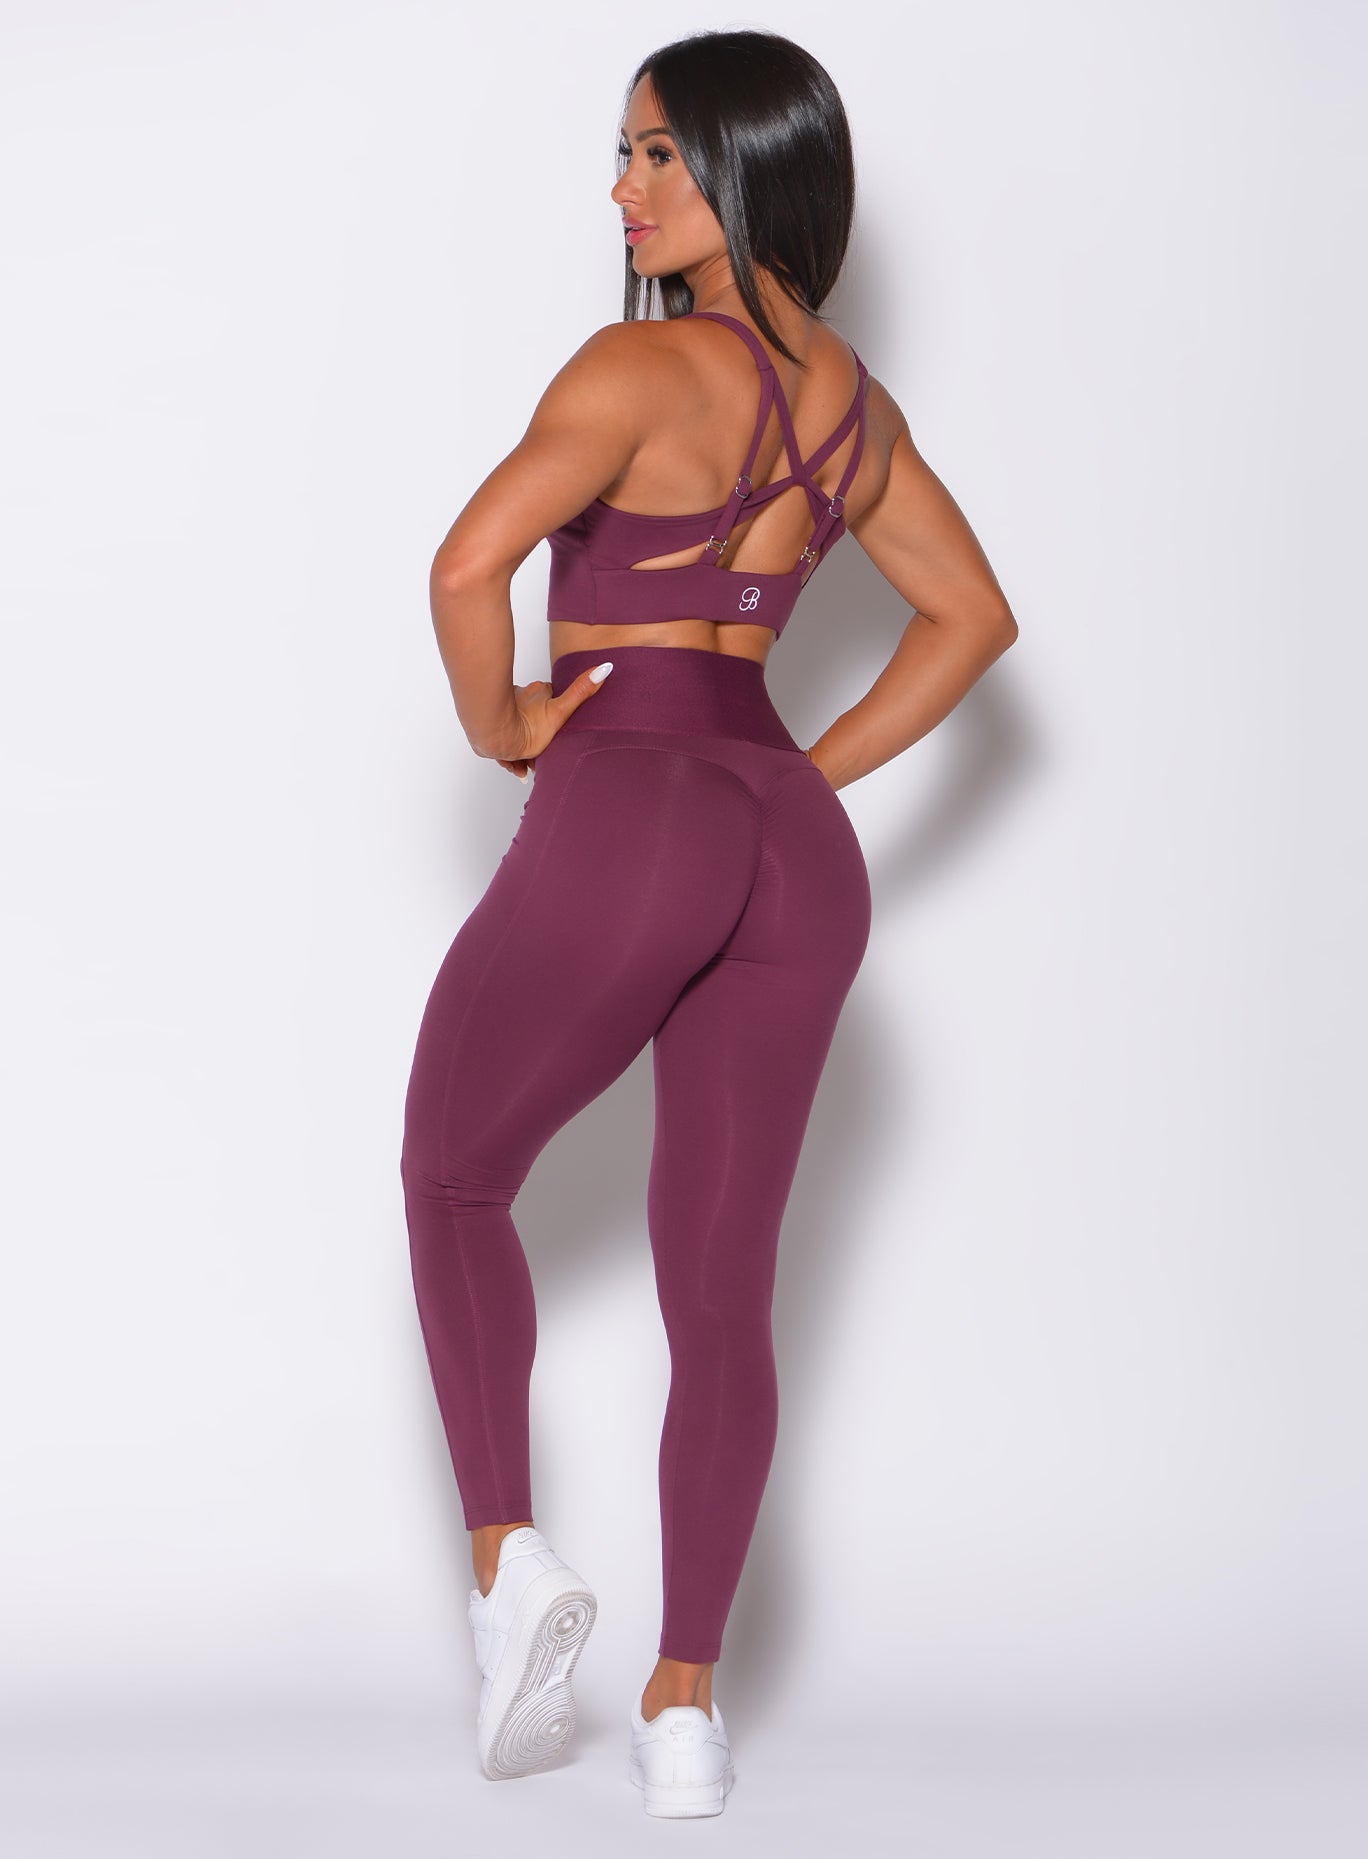 Back profile view of a model angled slightly to her left wearing  our waist cincher leggings in majestic purple color and a matching bra